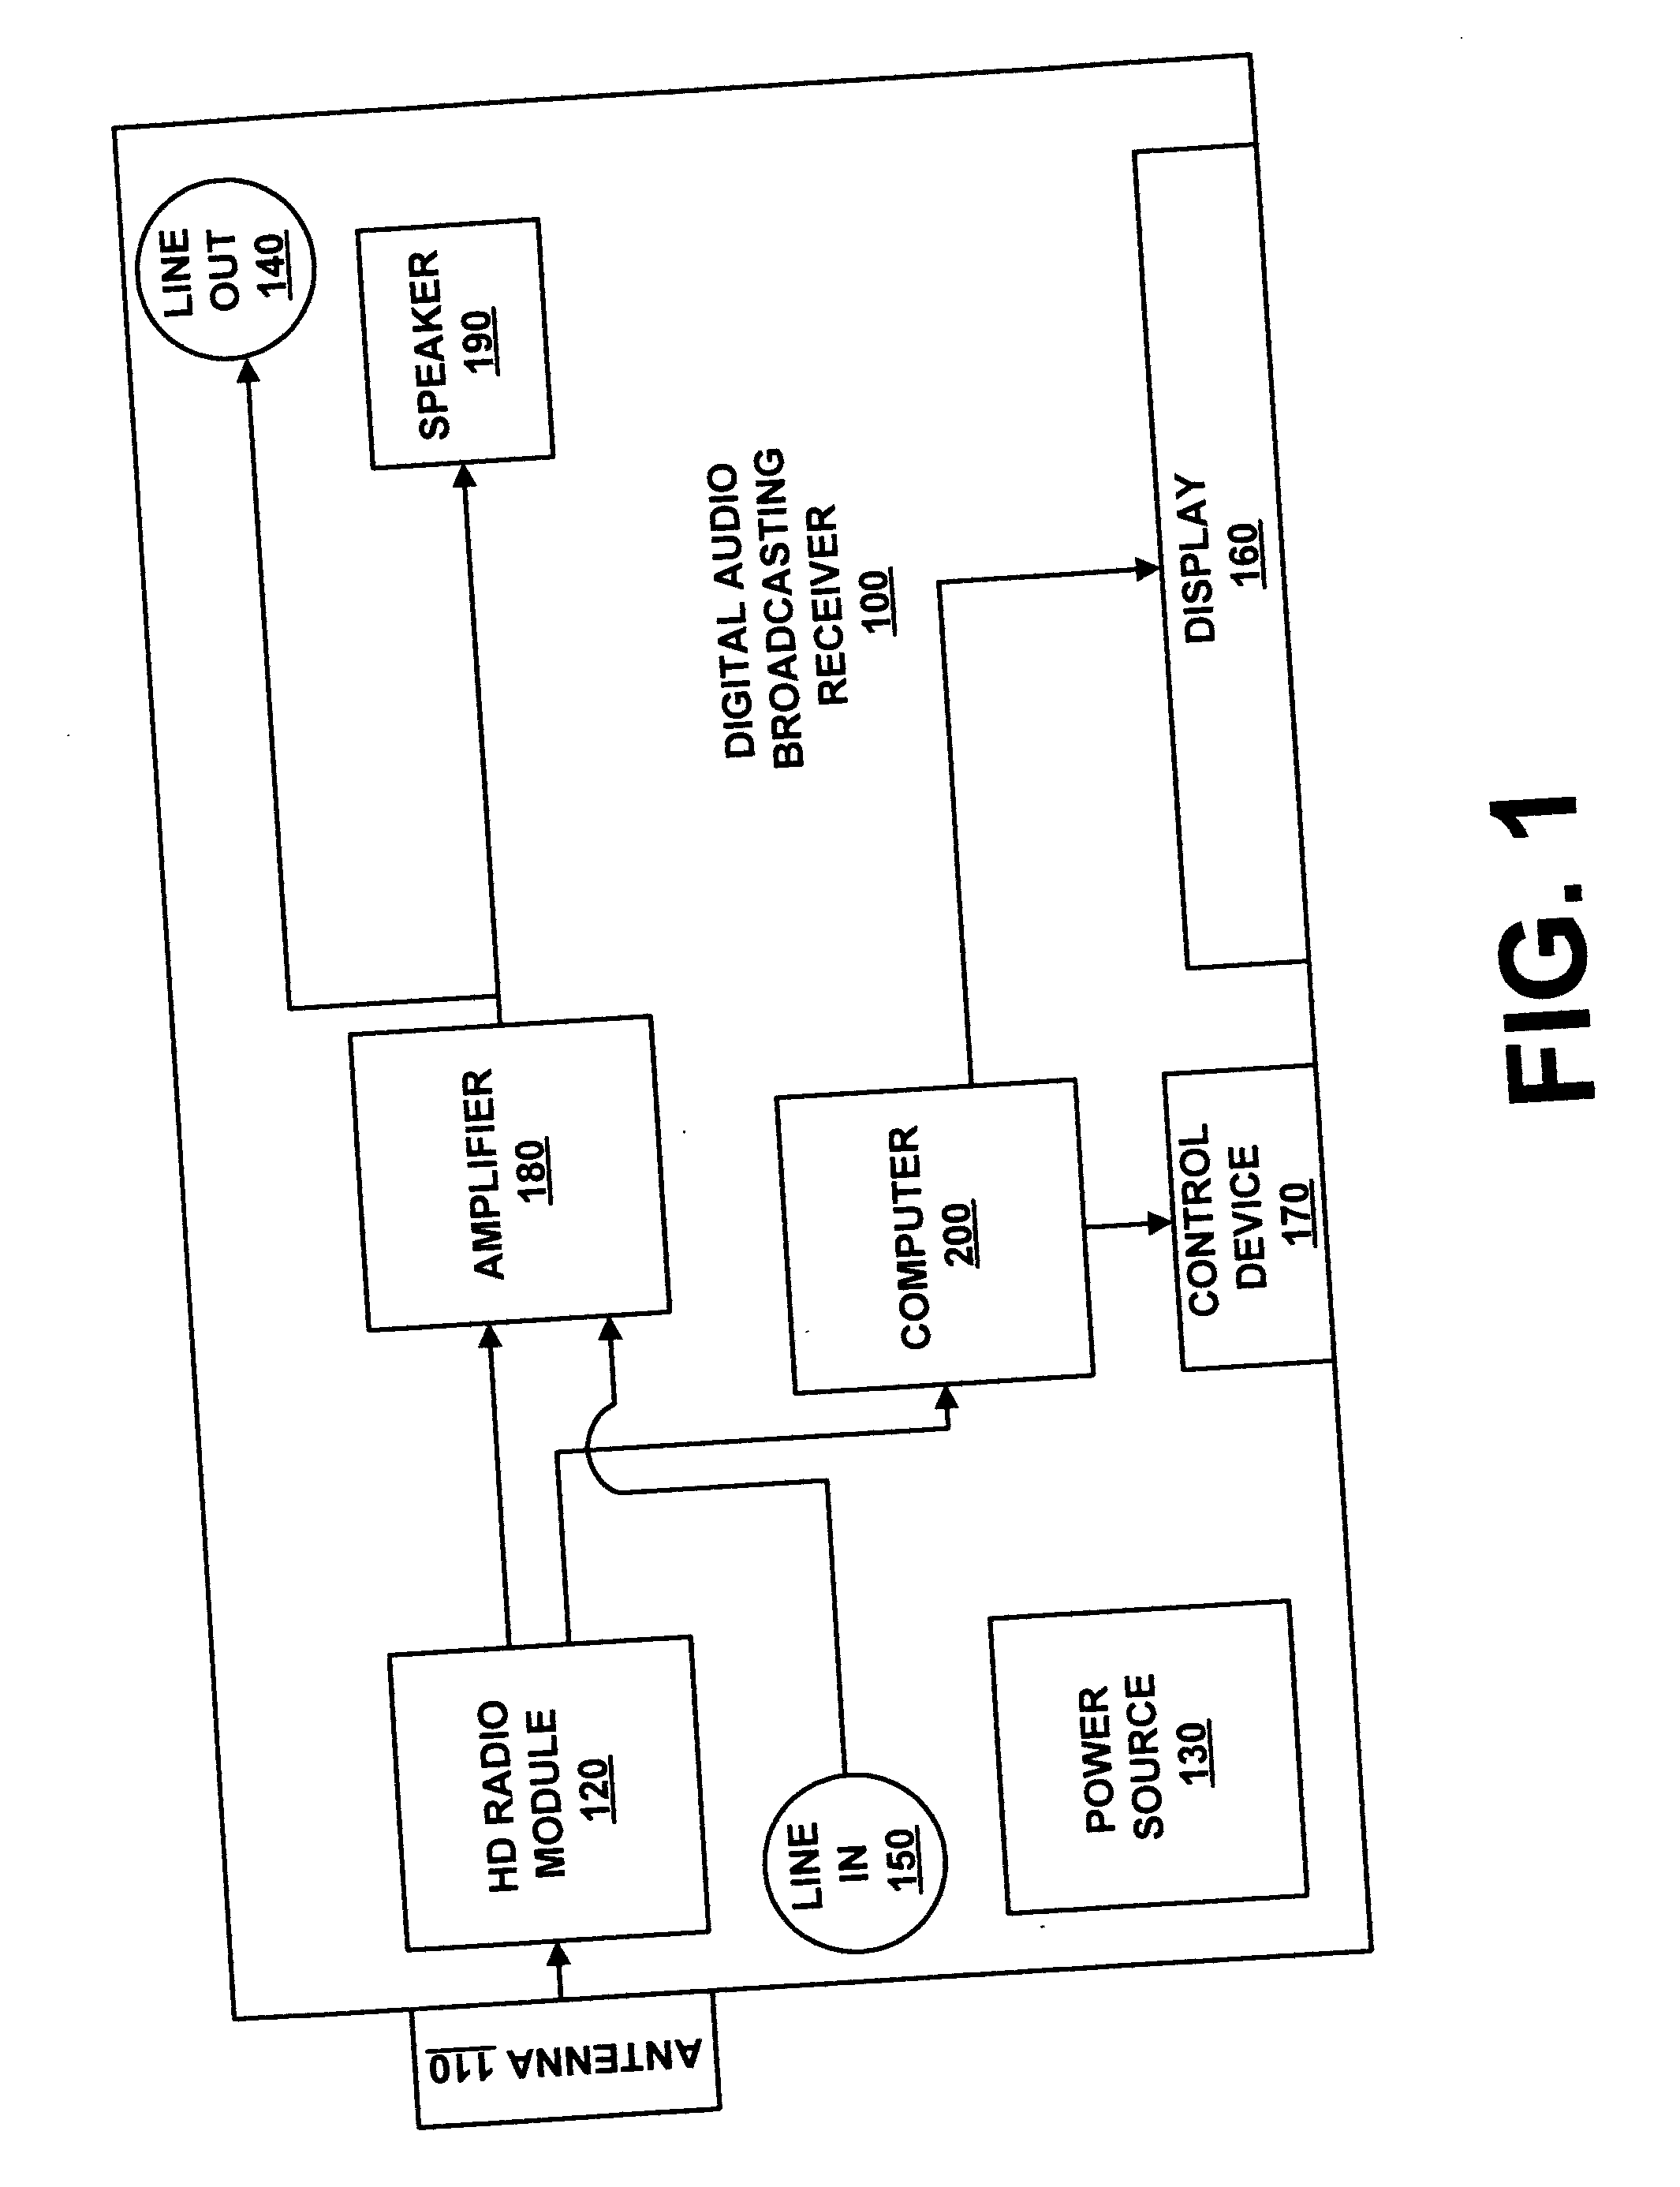 System and method for providing access to supplemental program services